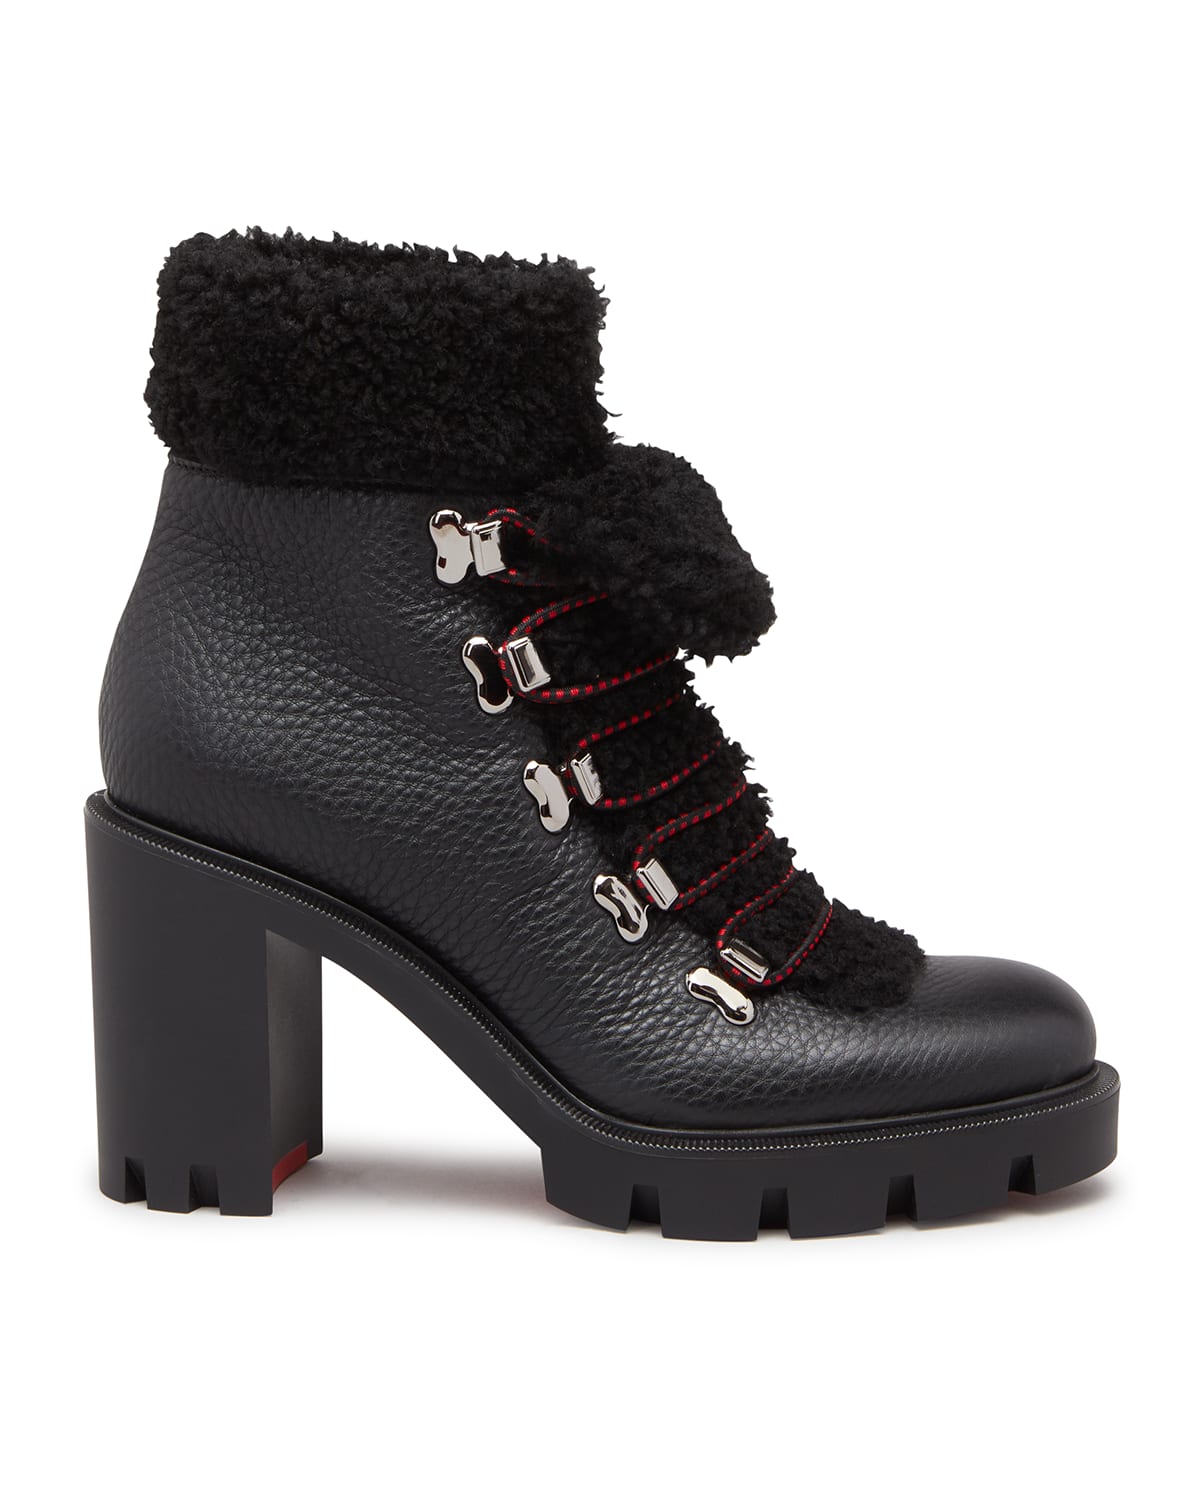 Edelvizir Leather Shearling Red Sole Ranger Booties